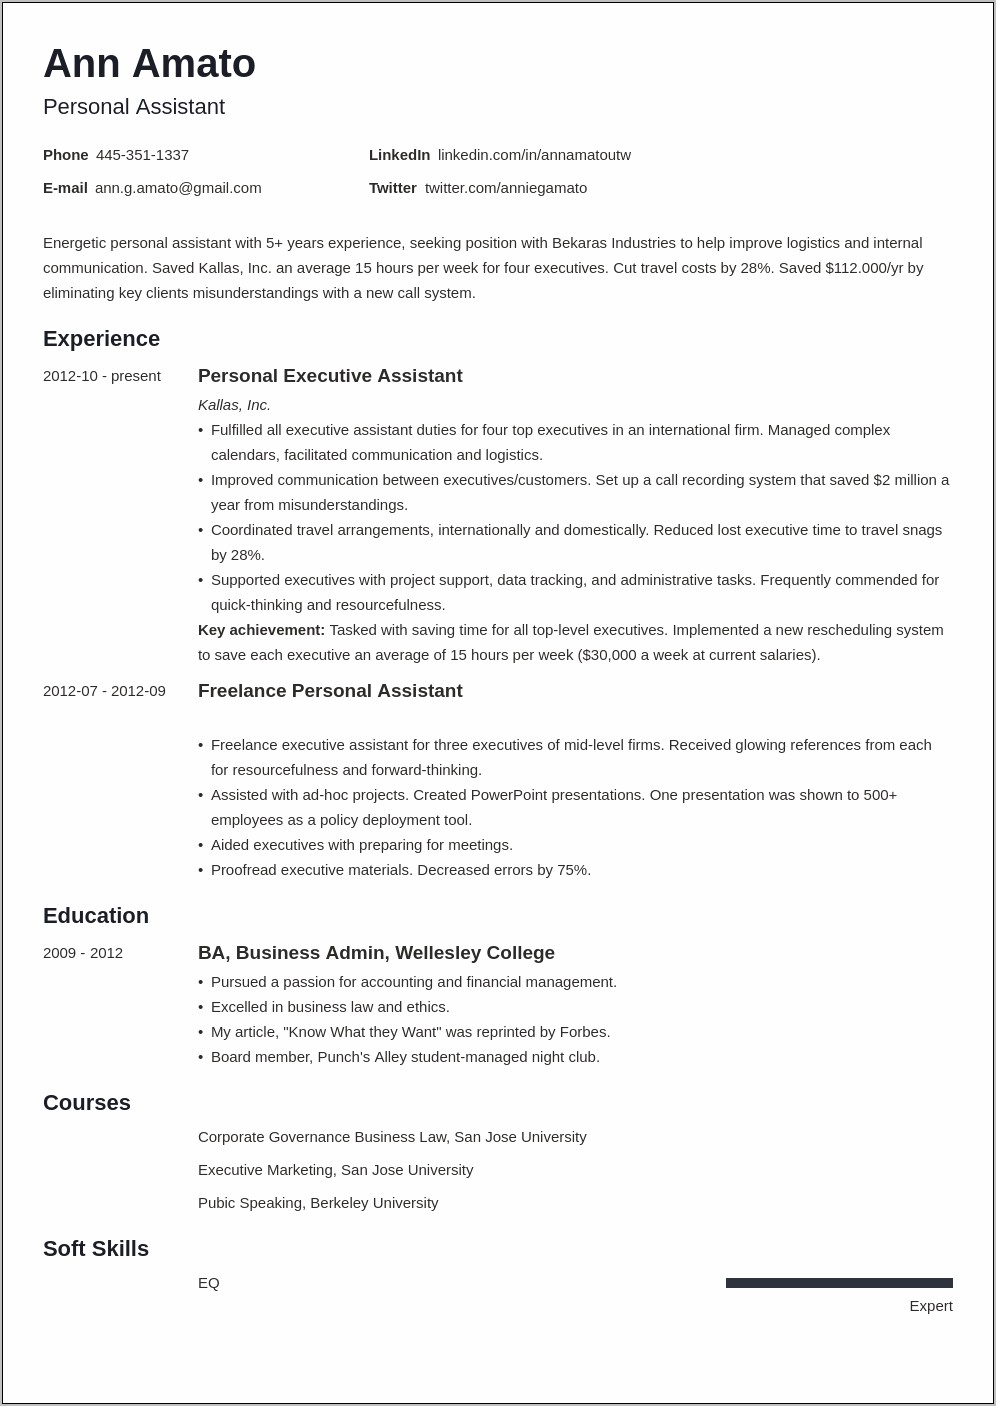 6 Months Experience Resume Sample